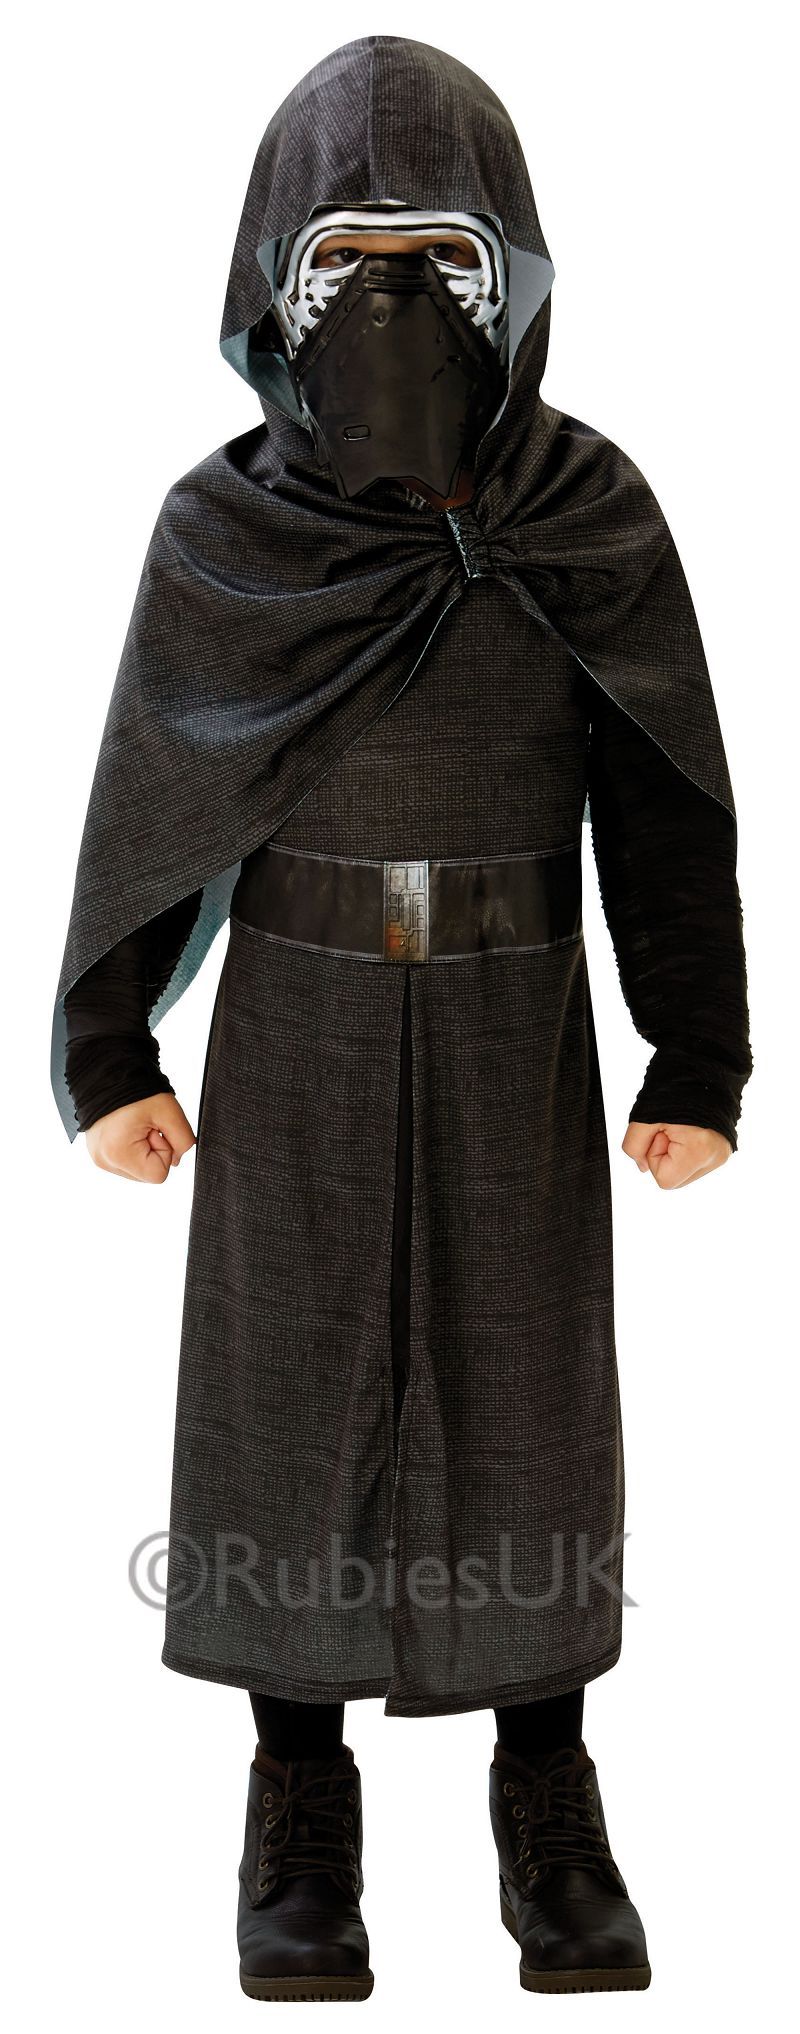 Kylo Ren Deluxe Medium Childrens Costumes Male Ages 5 6 Years_1